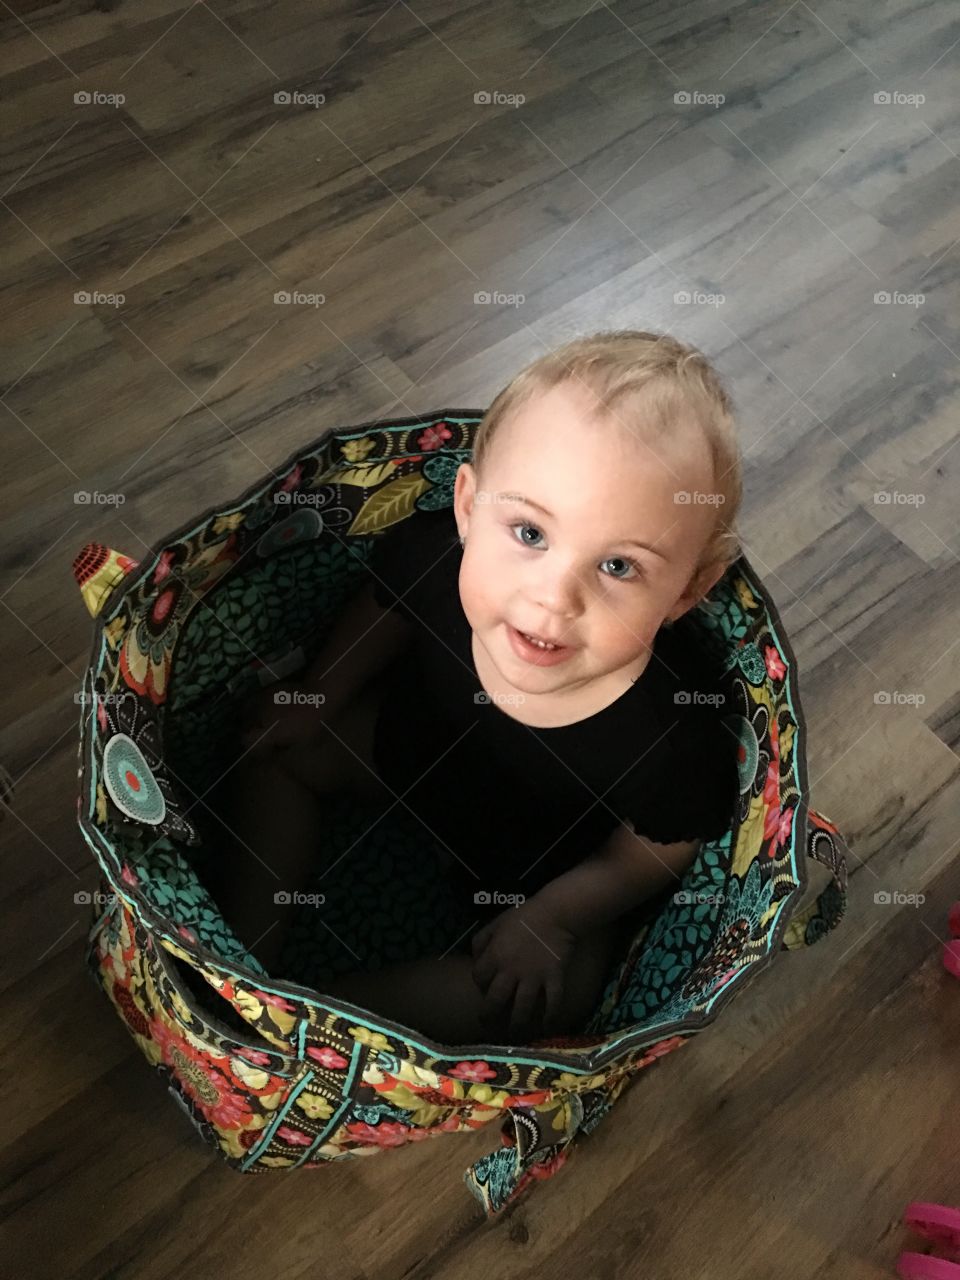 Baby in a bag.